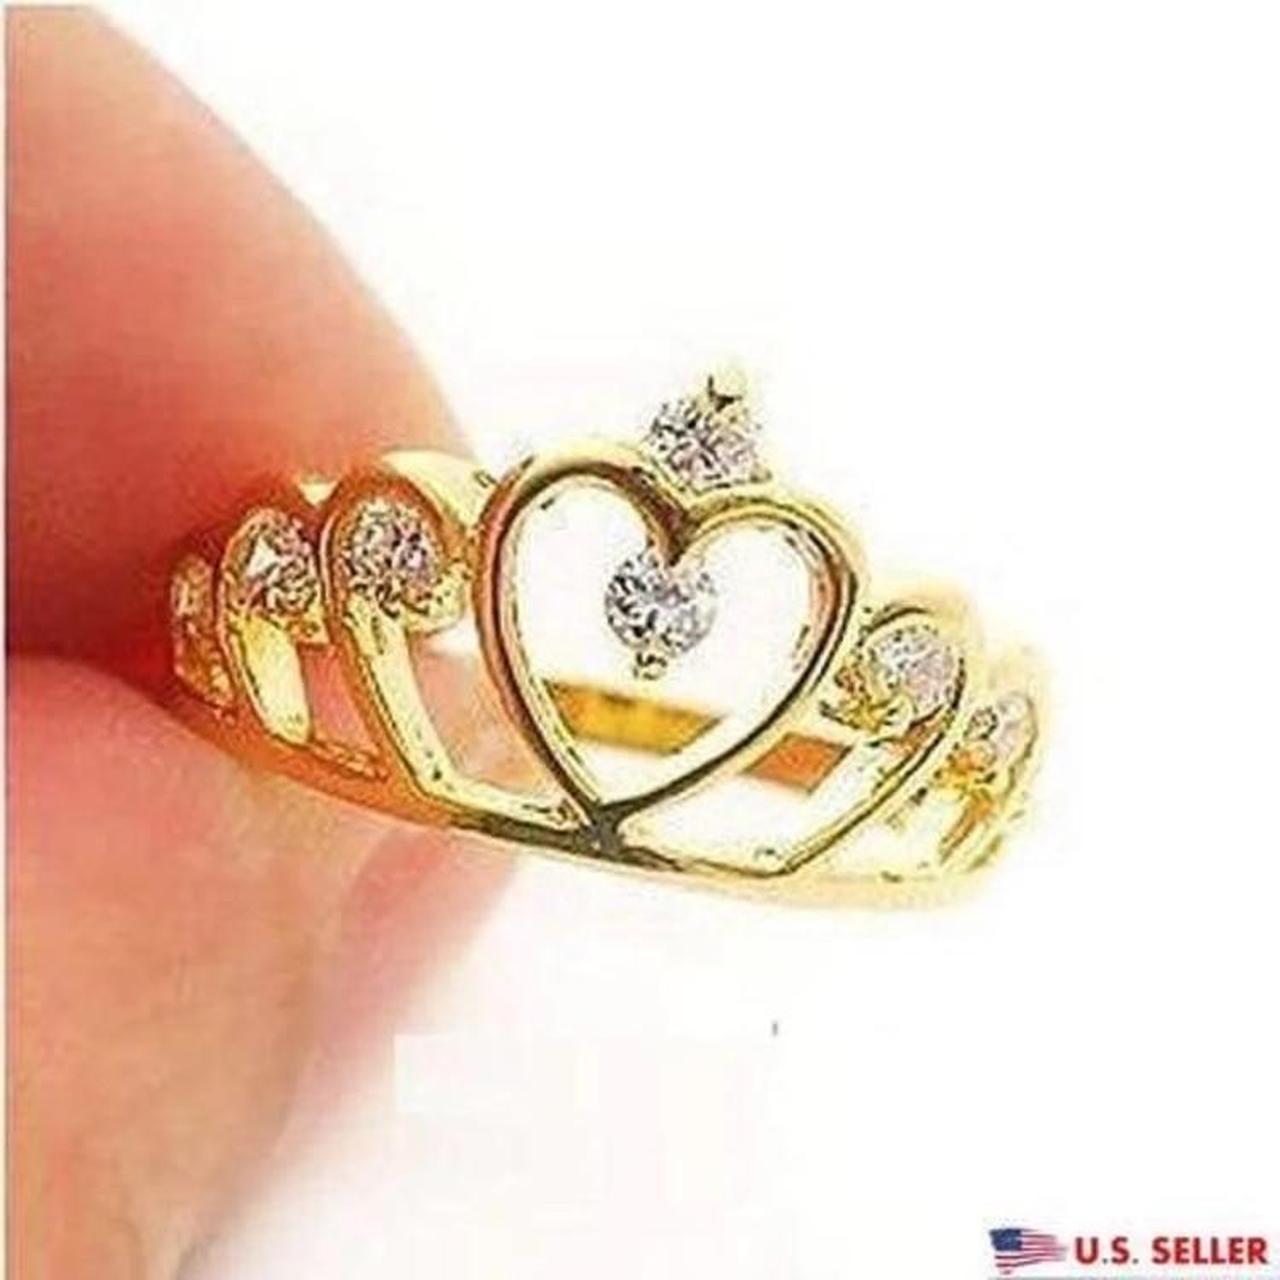 Product Image 2 - Gold heart crown ring size